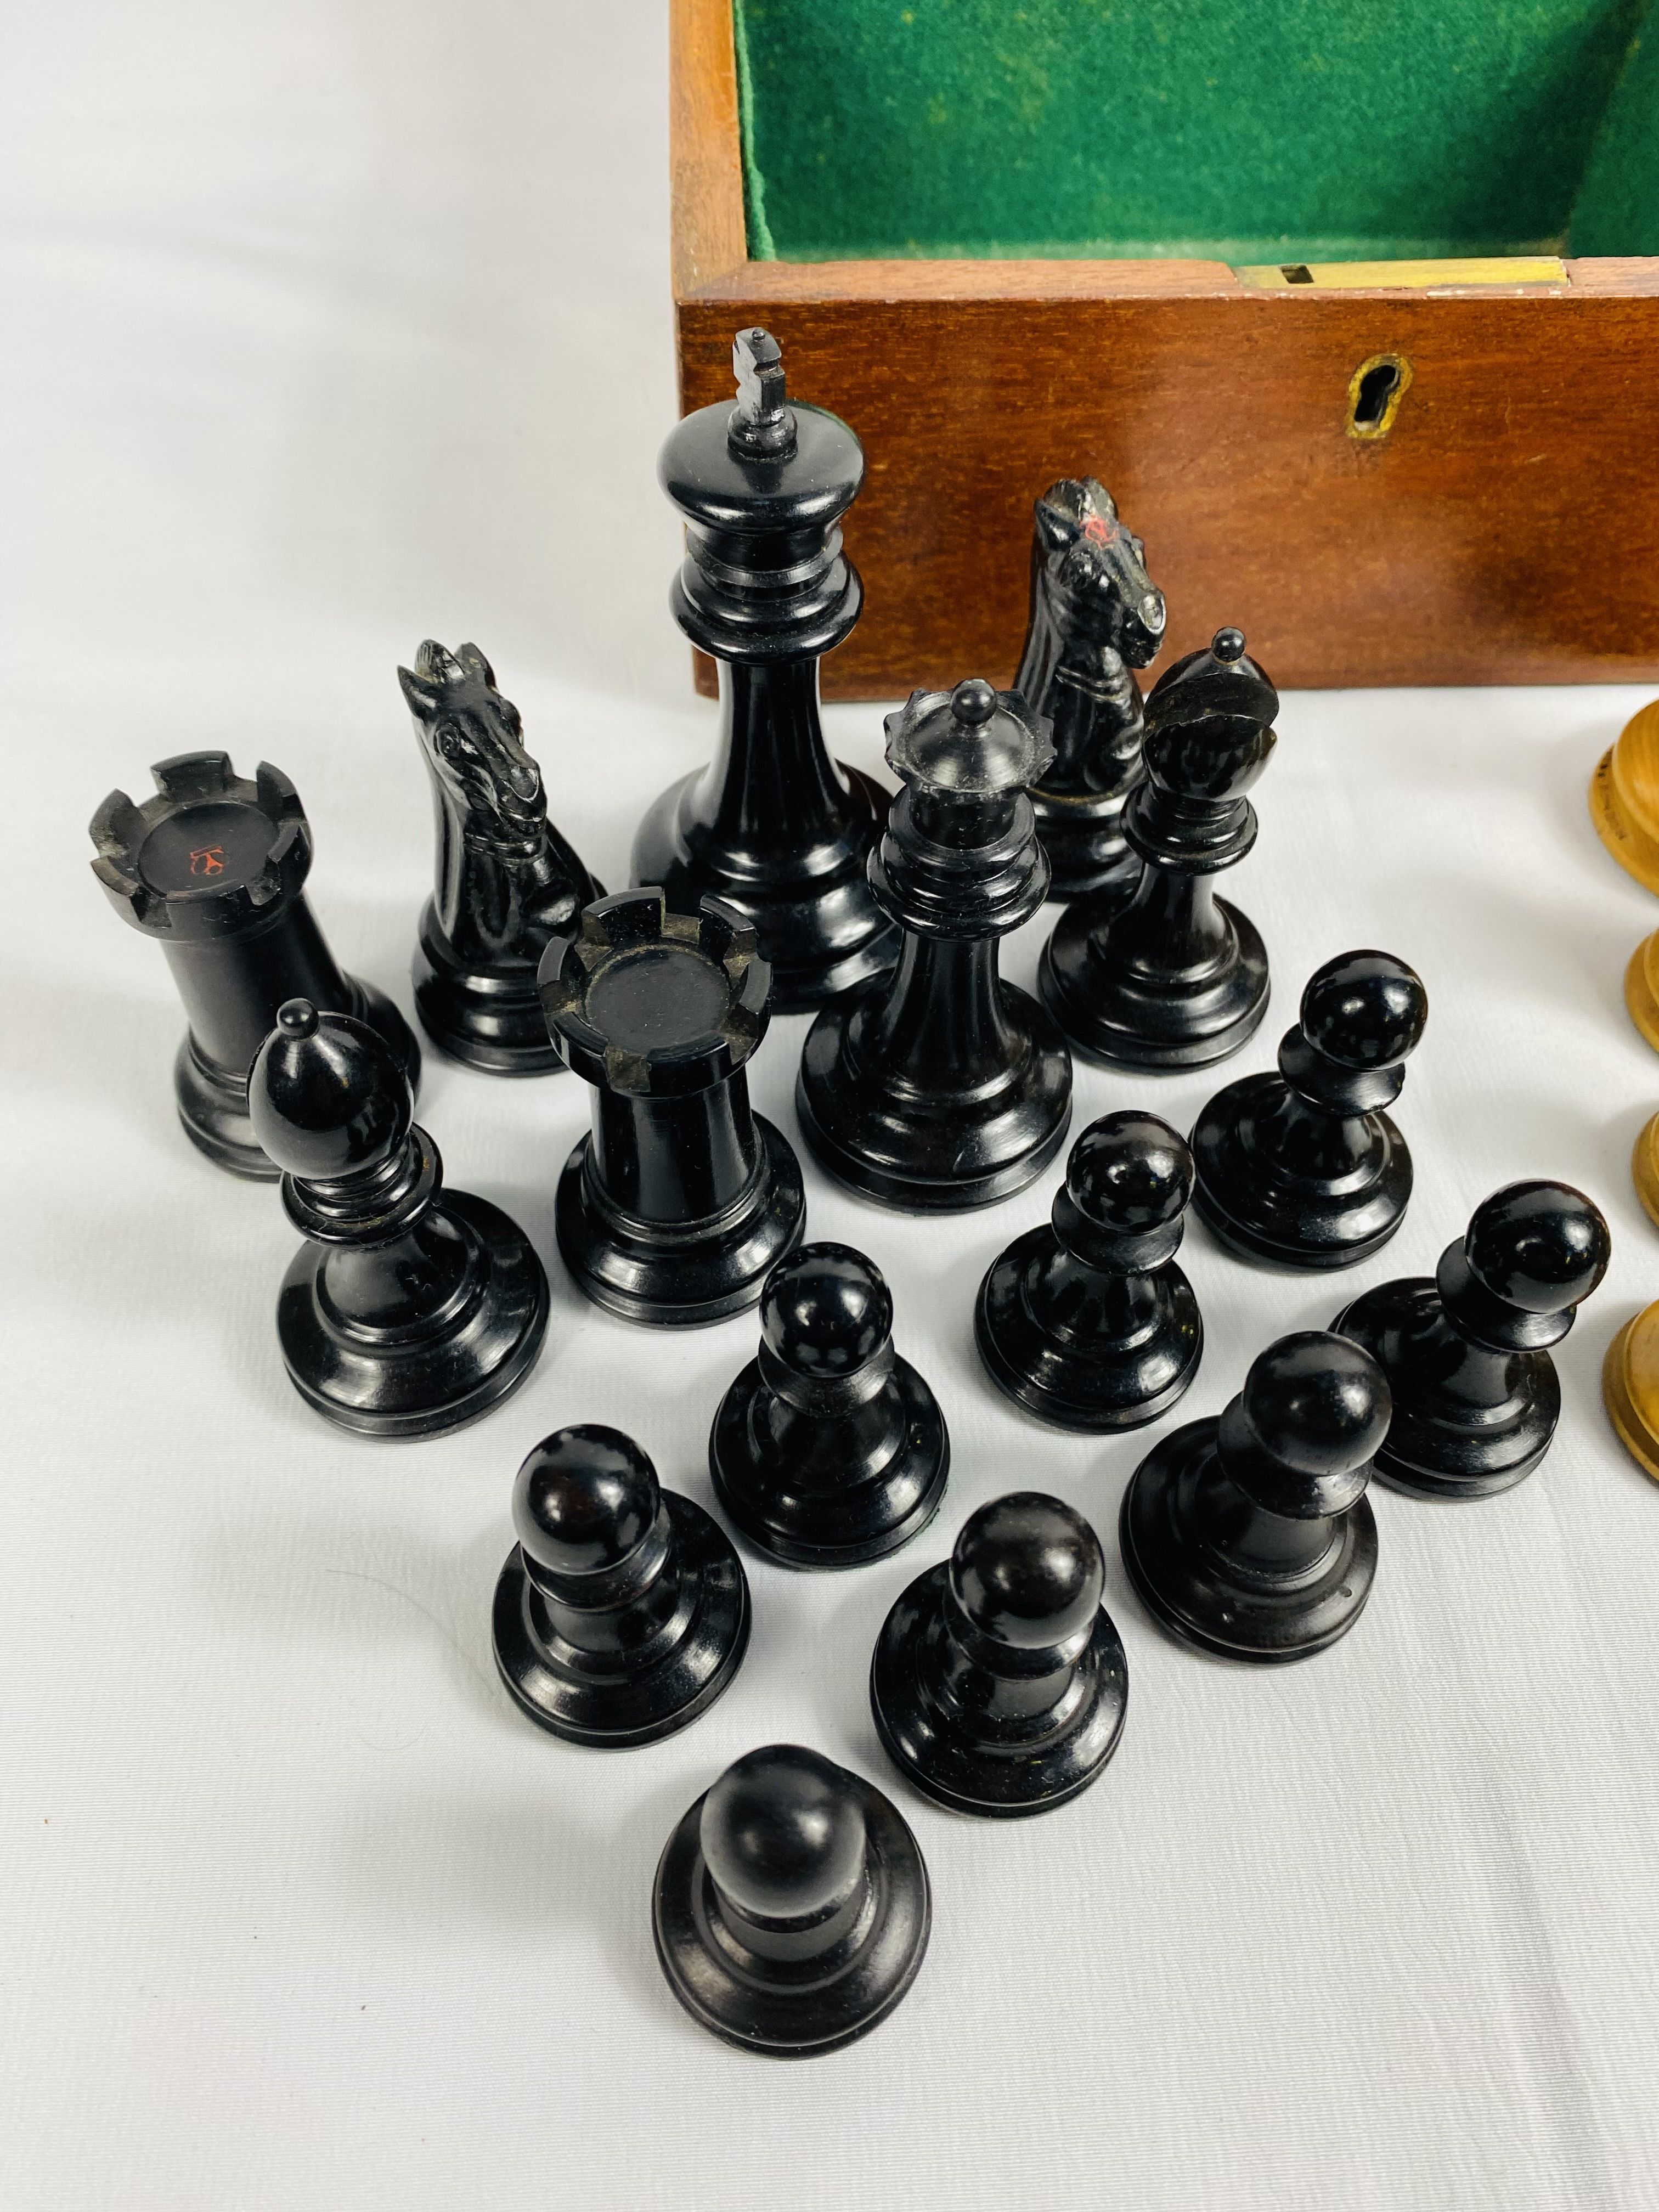 Jacques and Son Staunton style chess set - Image 4 of 6